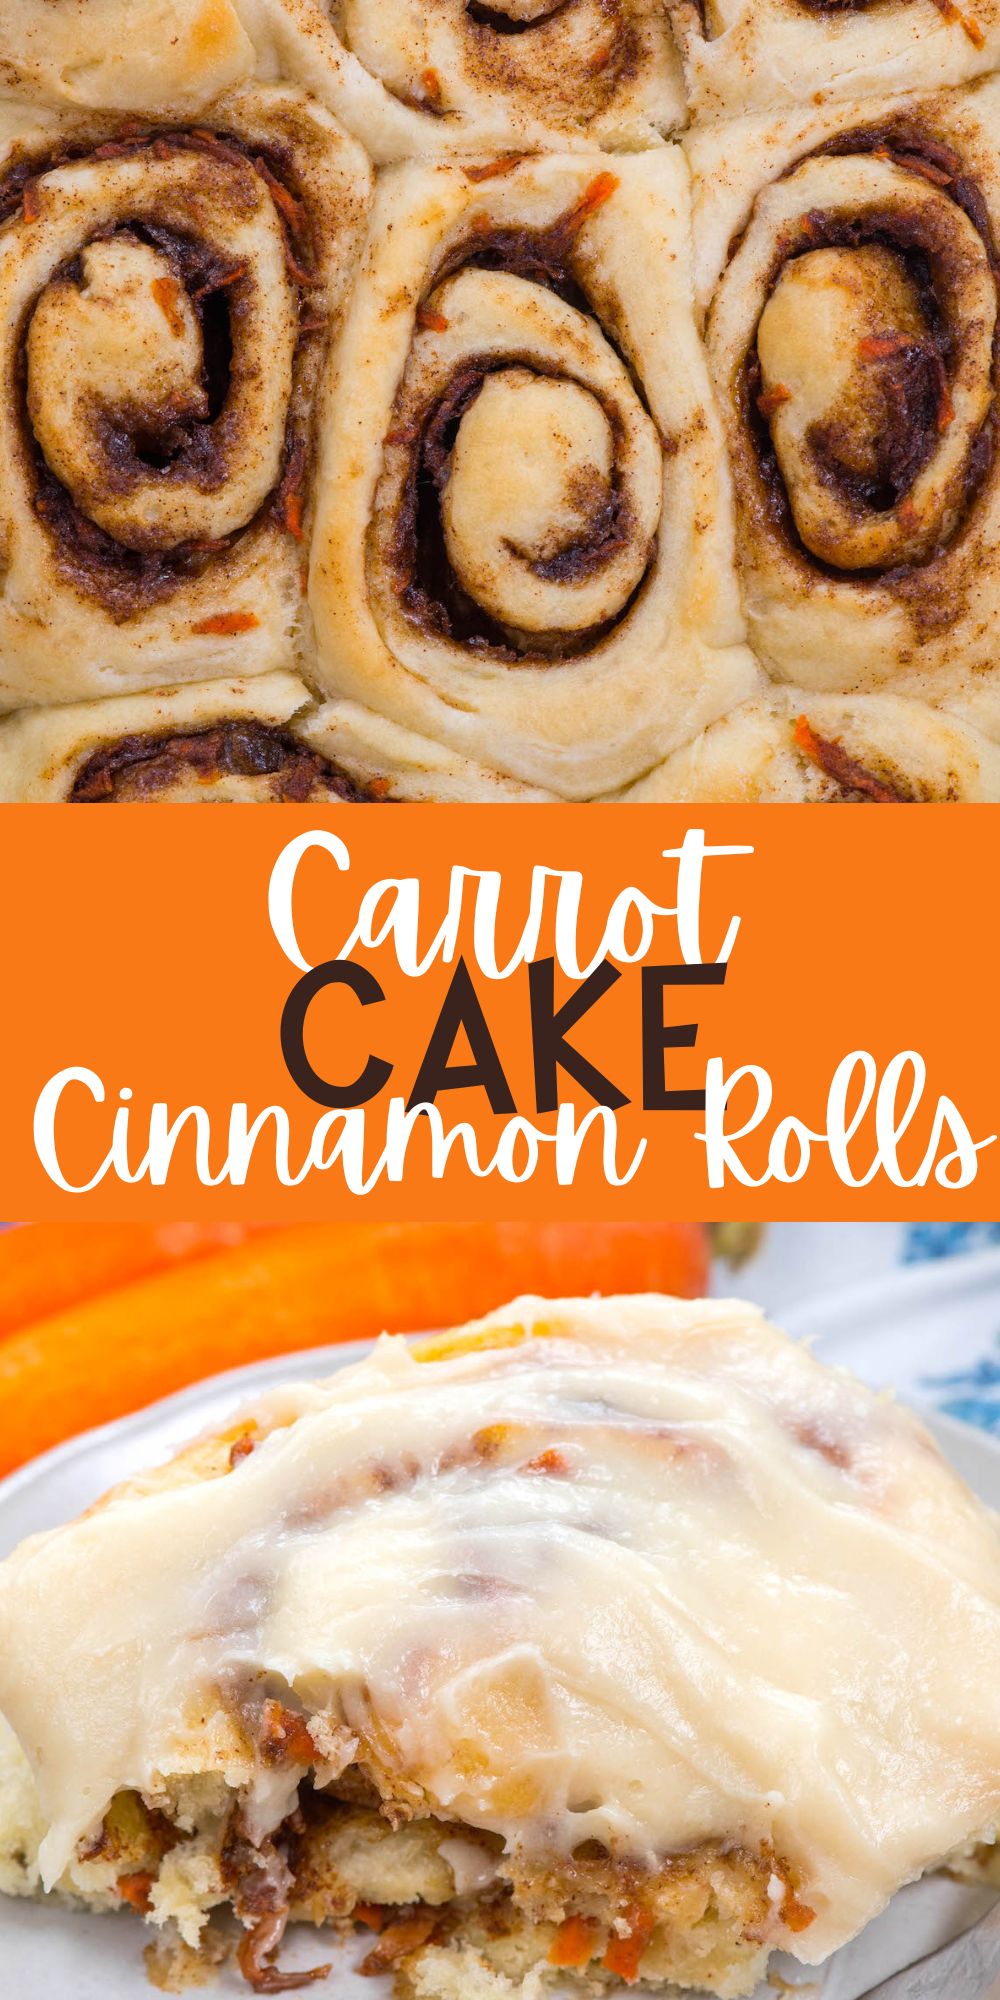 two photos of cinnamon rolls with carrots baked in with words on the image.